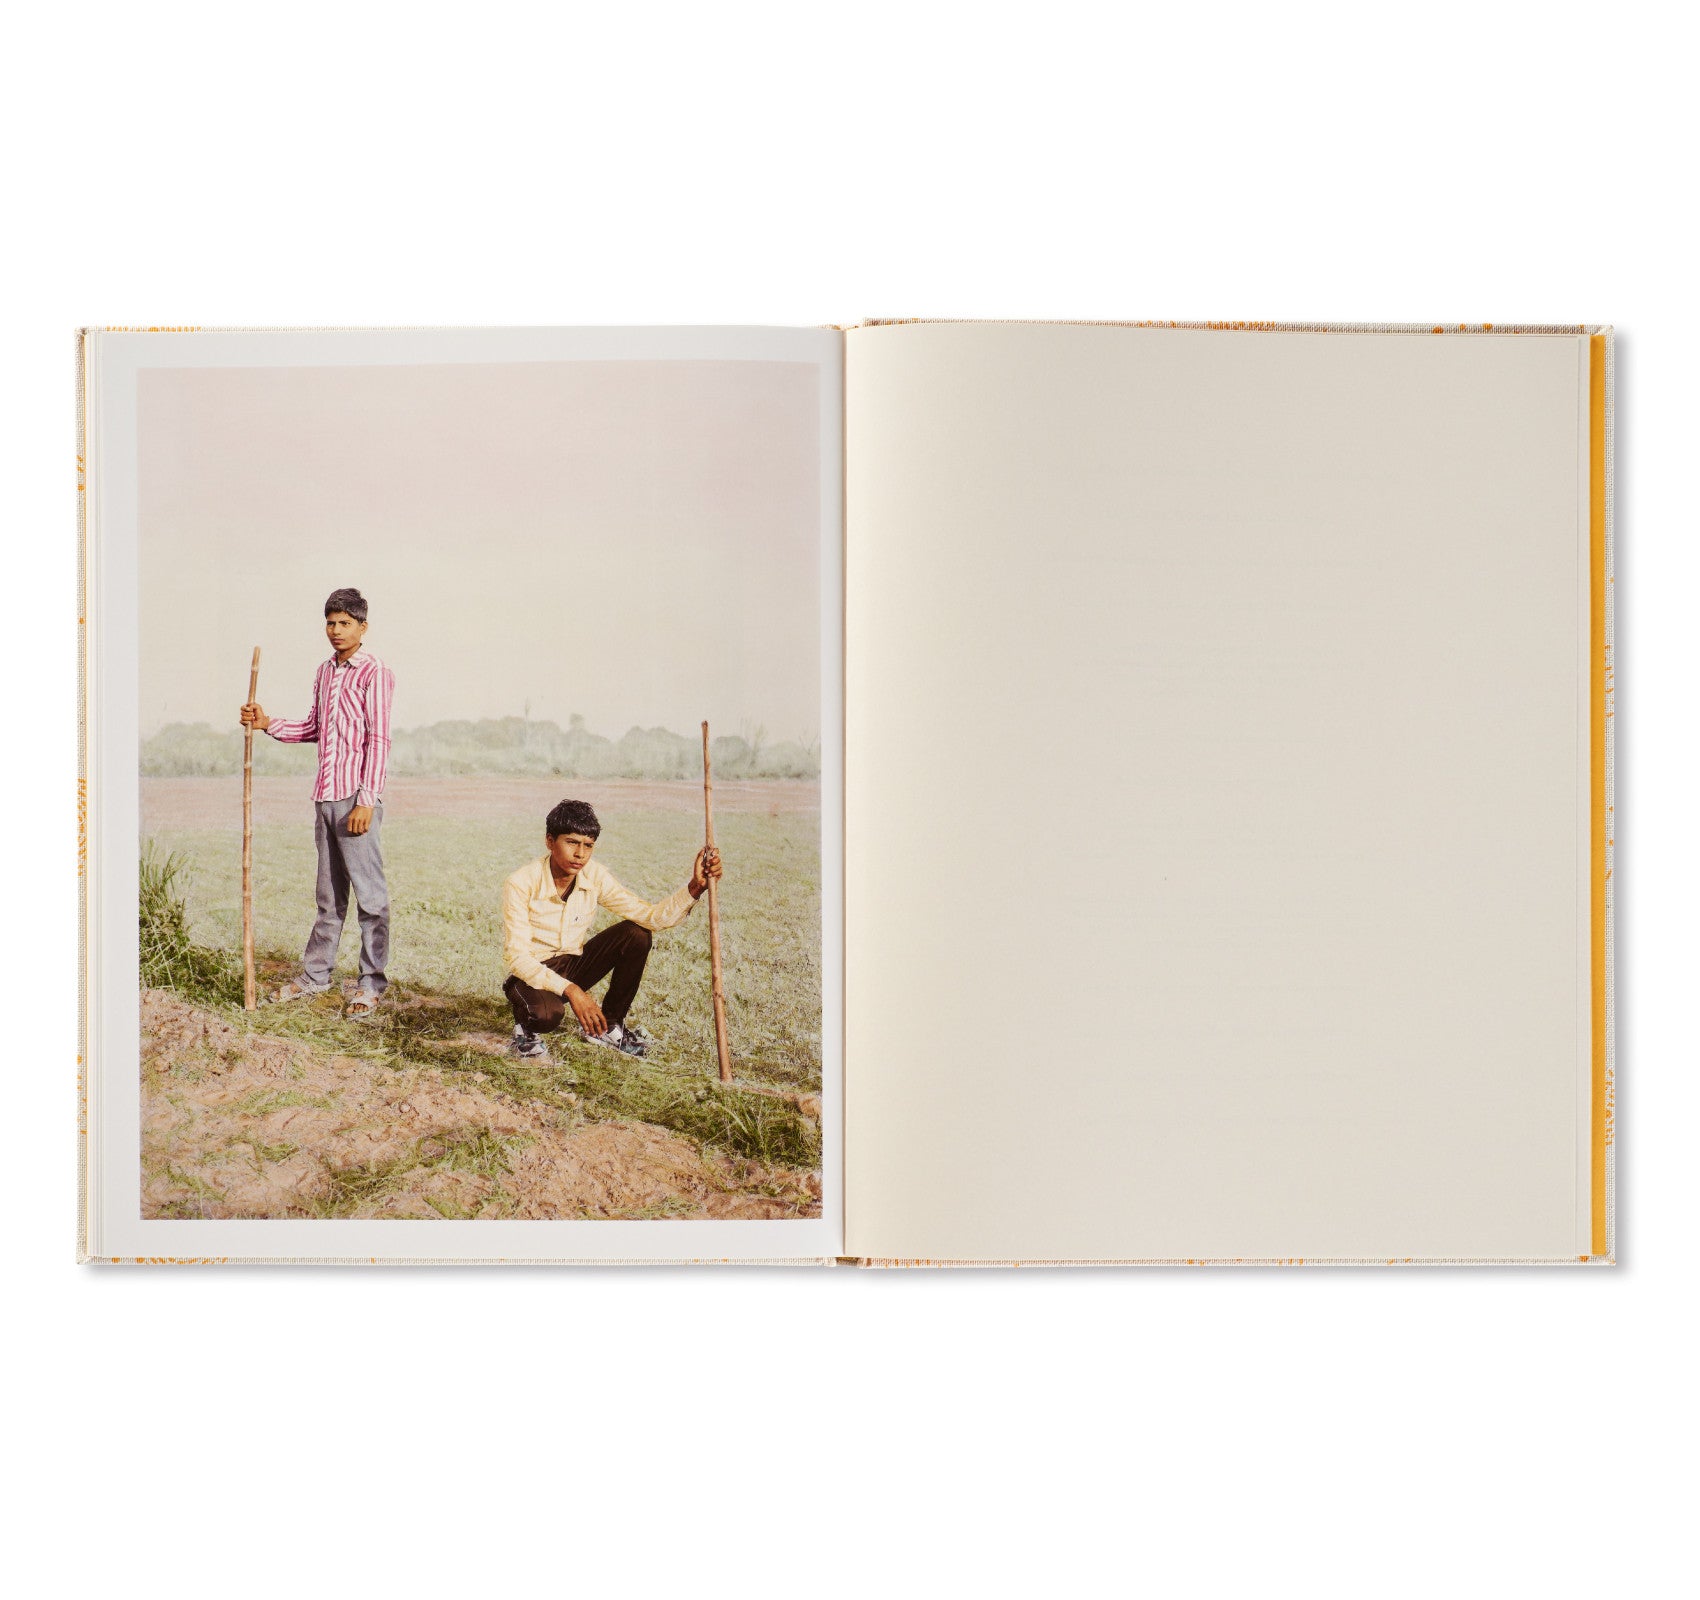 EARLY TIMES by Vasantha Yogananthan [SIGNED]